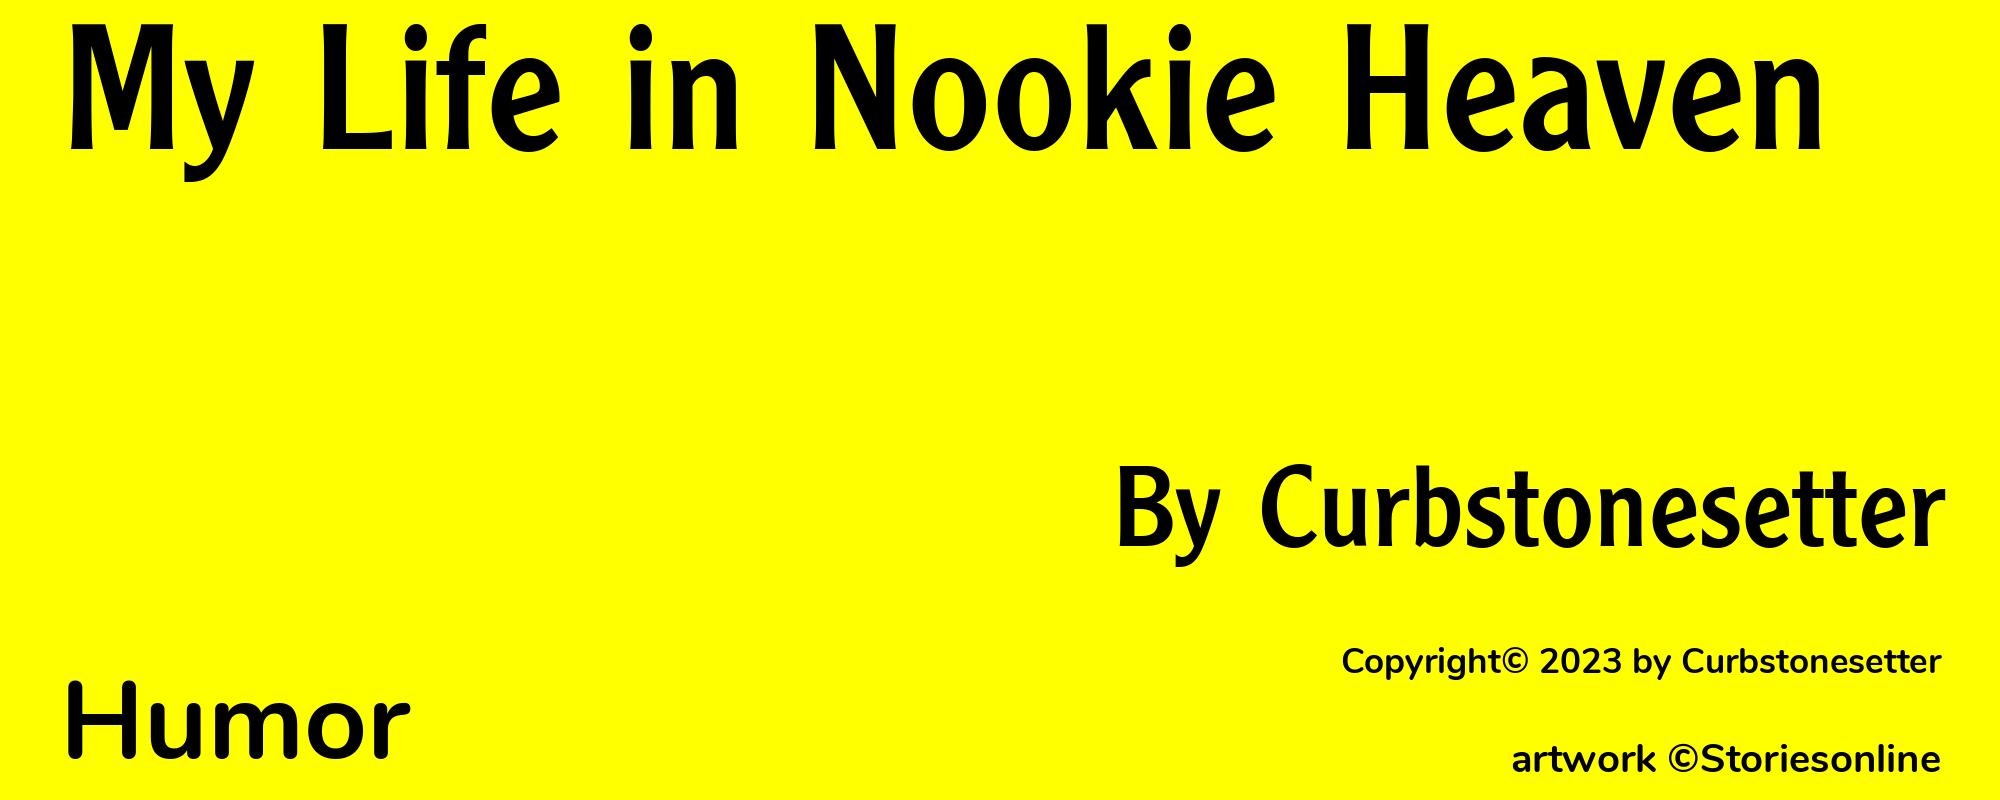 My Life in Nookie Heaven - Cover